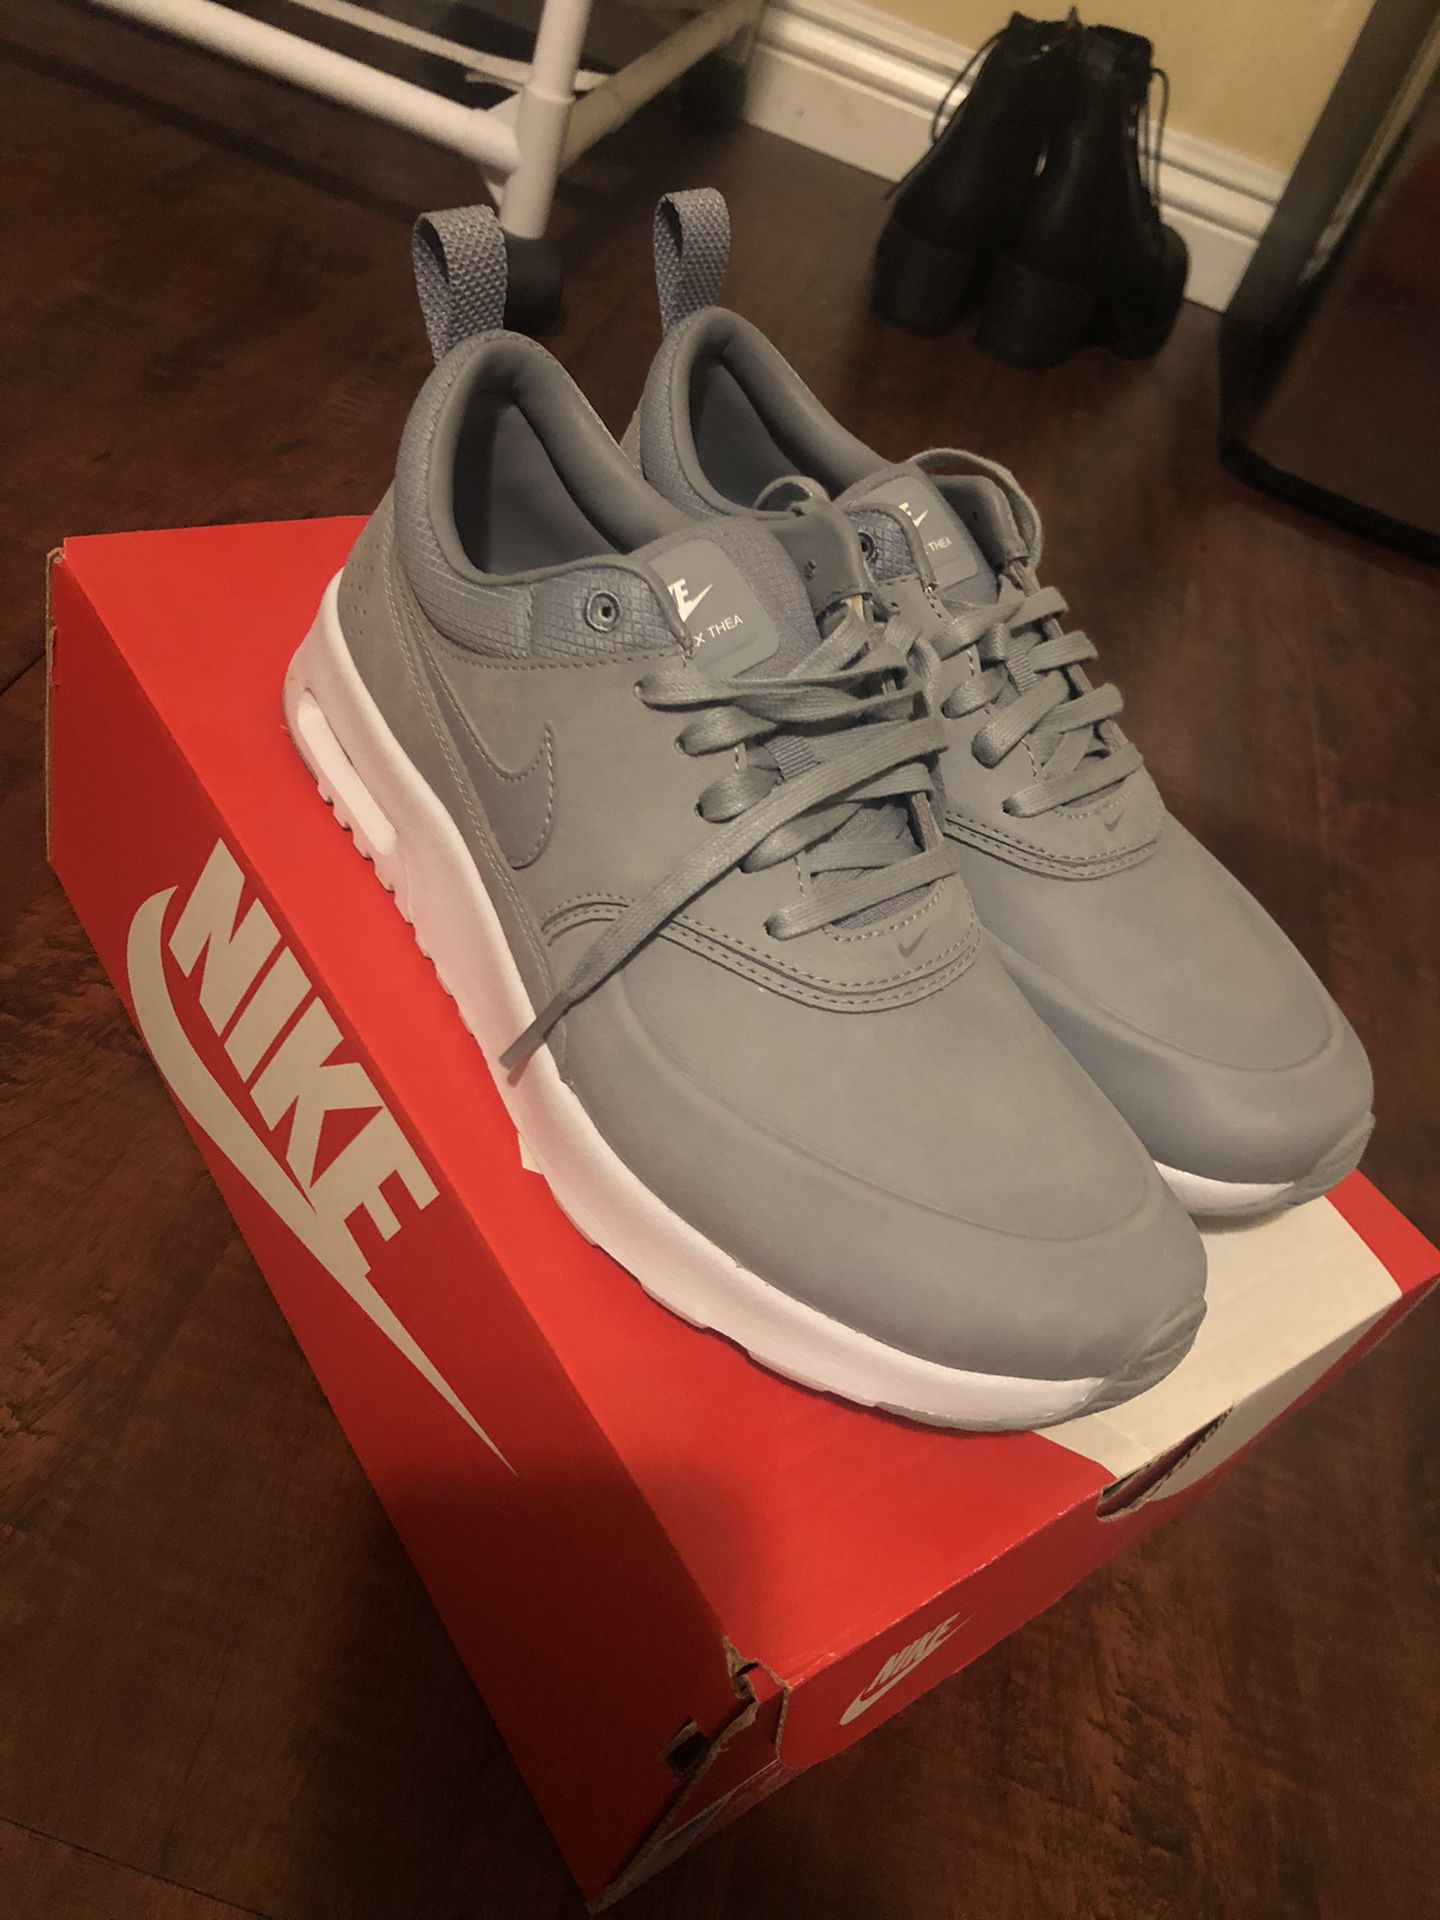 Nike Air Thea - BRAND NEW for in Ana, CA - OfferUp